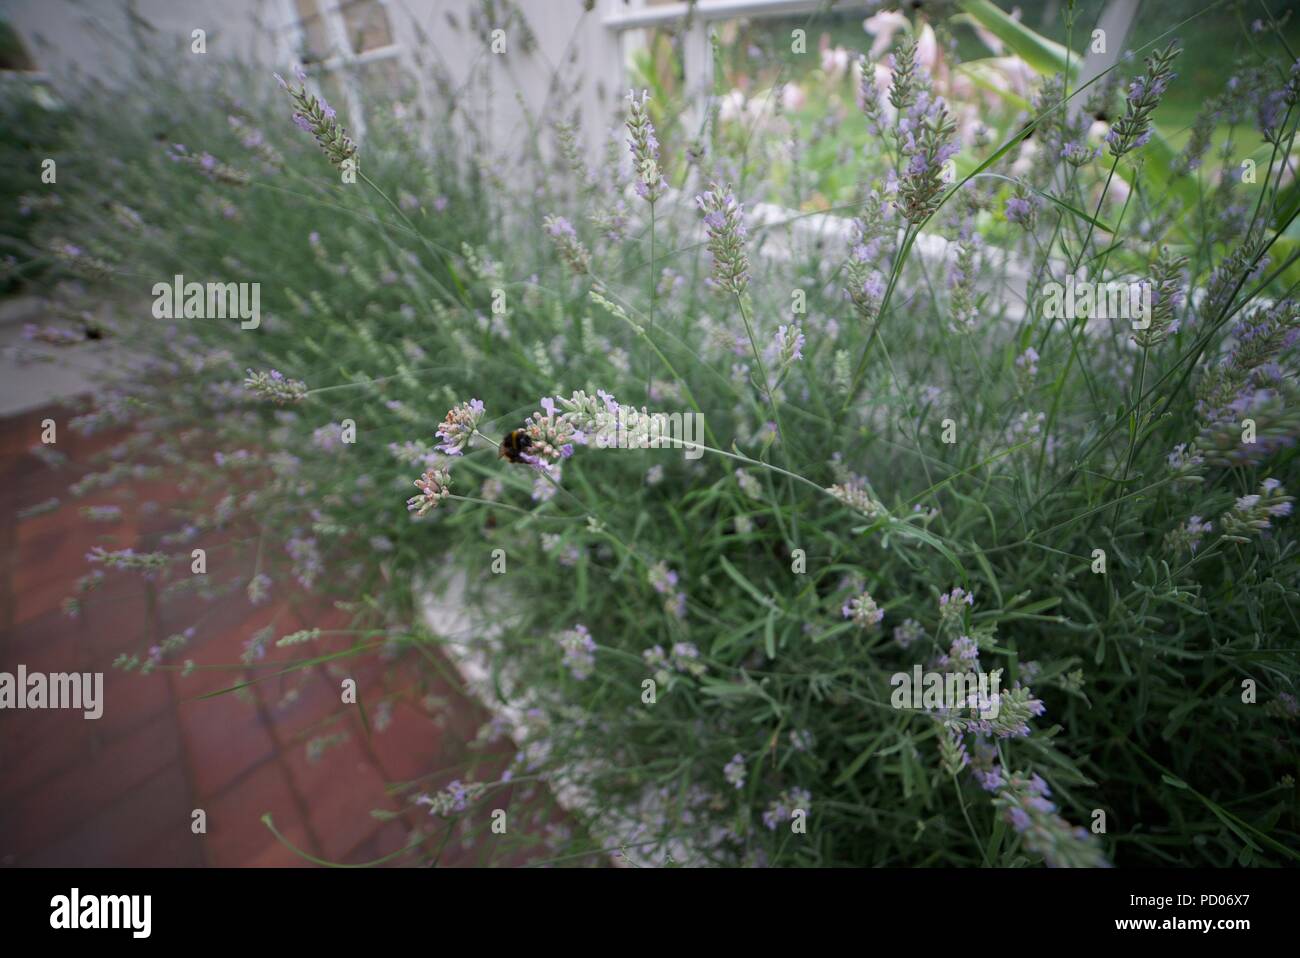 Bumblebees on lavender flowers in a greenhouse (Lavandula) Stock Photo